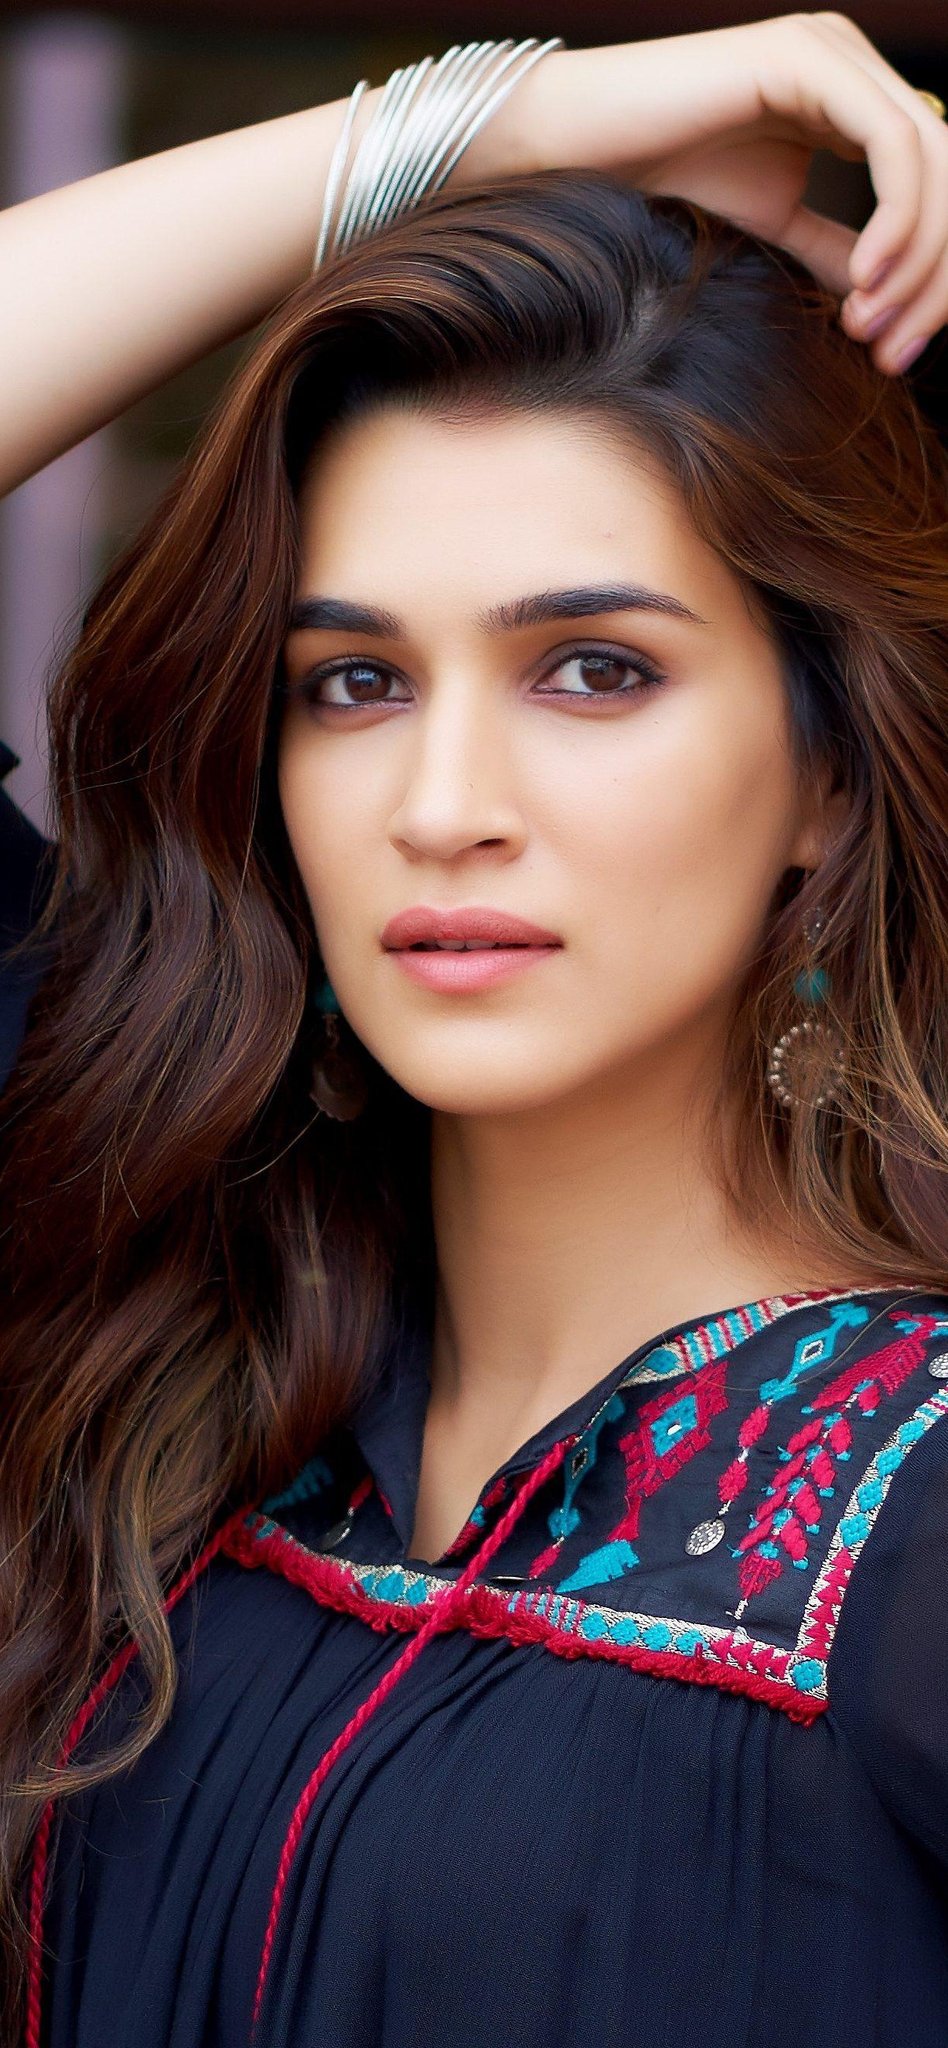 Kriti Sanon I Want To Drench That Face In Multiple Loads Of Cum Scrolller